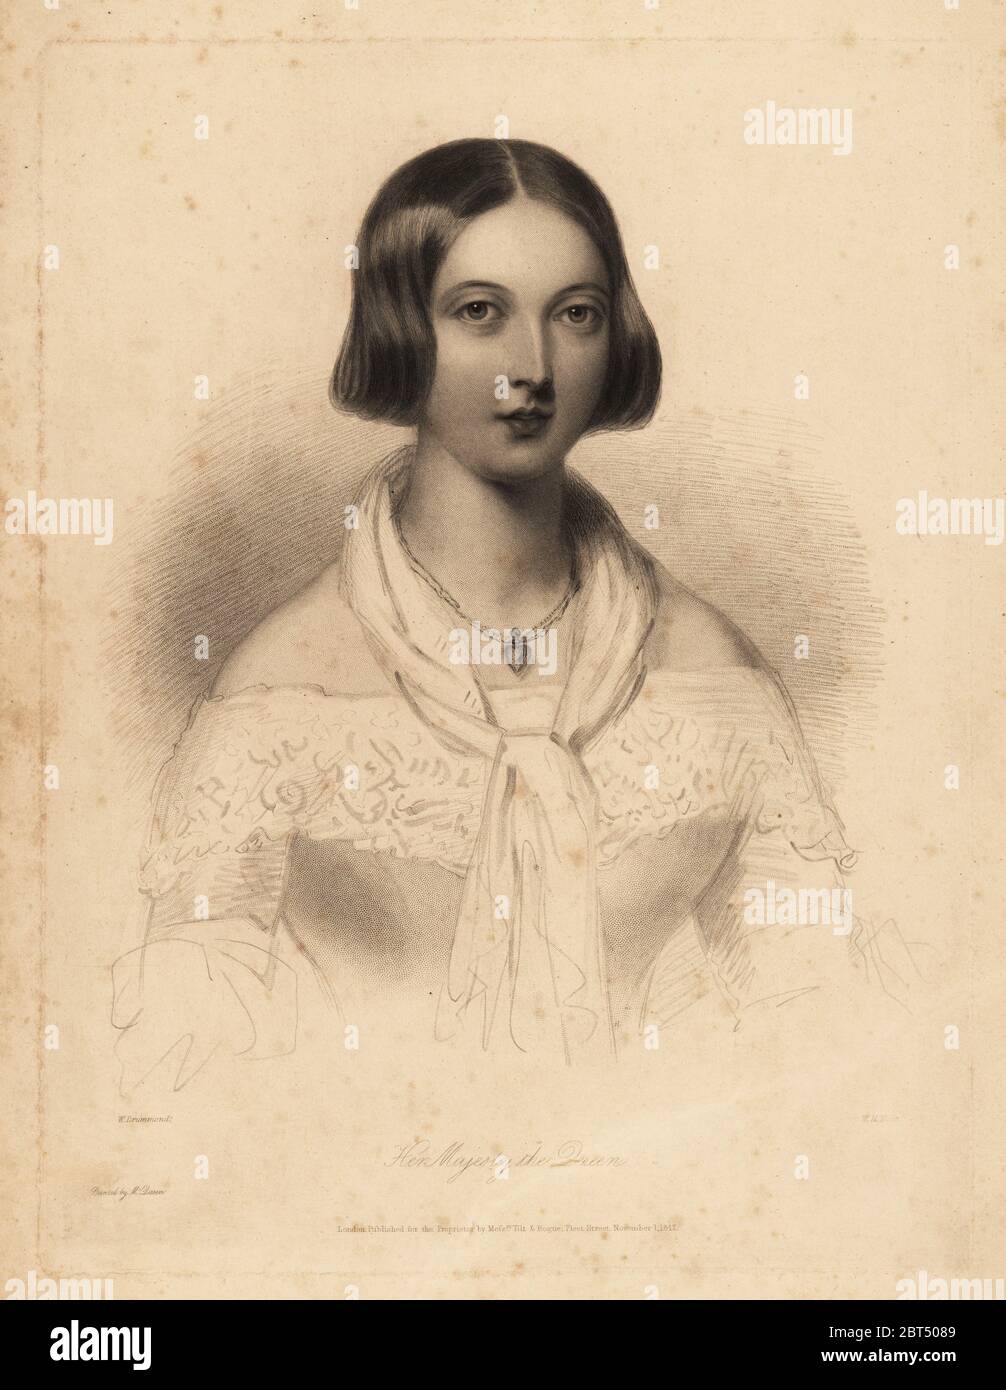 Young Queen Victoria, early 20s. Steel stipple engraving by William Henry Mote after an illustration by William Drummond from Charles Heaths English Pearls, or Portraits for the Boudoir, Tilt and Bogue, London, 1843. Stock Photo